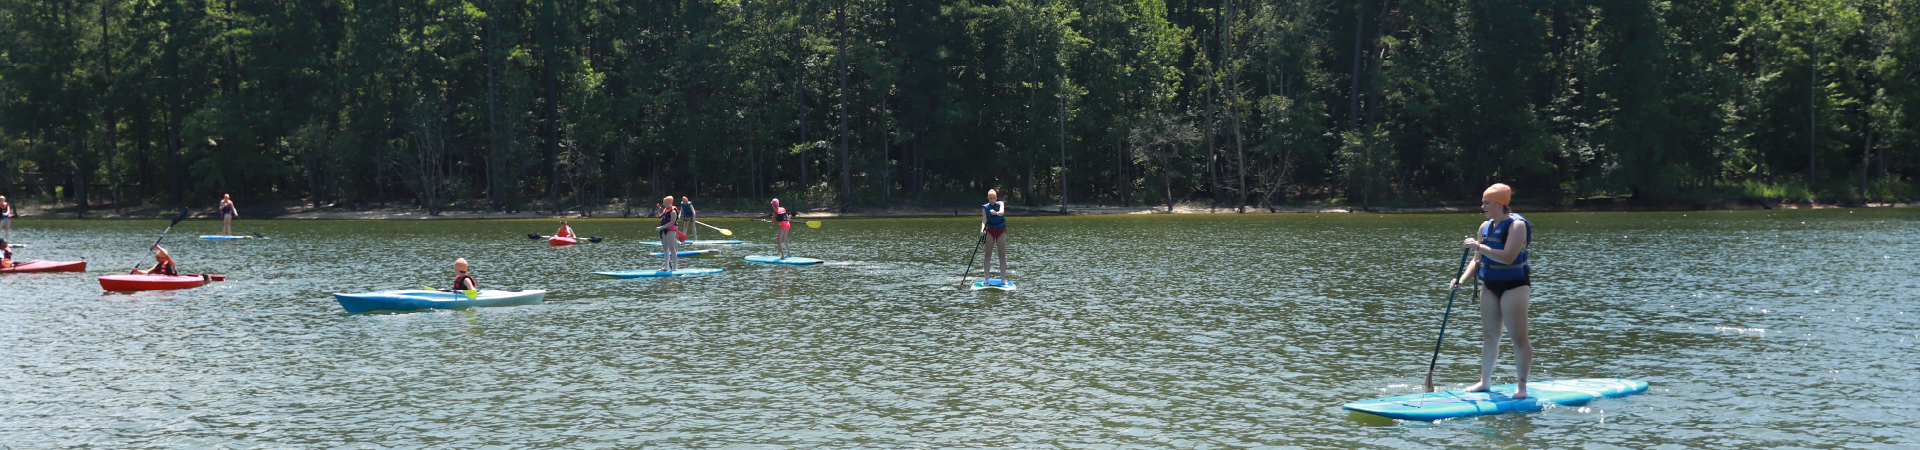  group of Girl Scouts paddling on paddle boards in a lake 